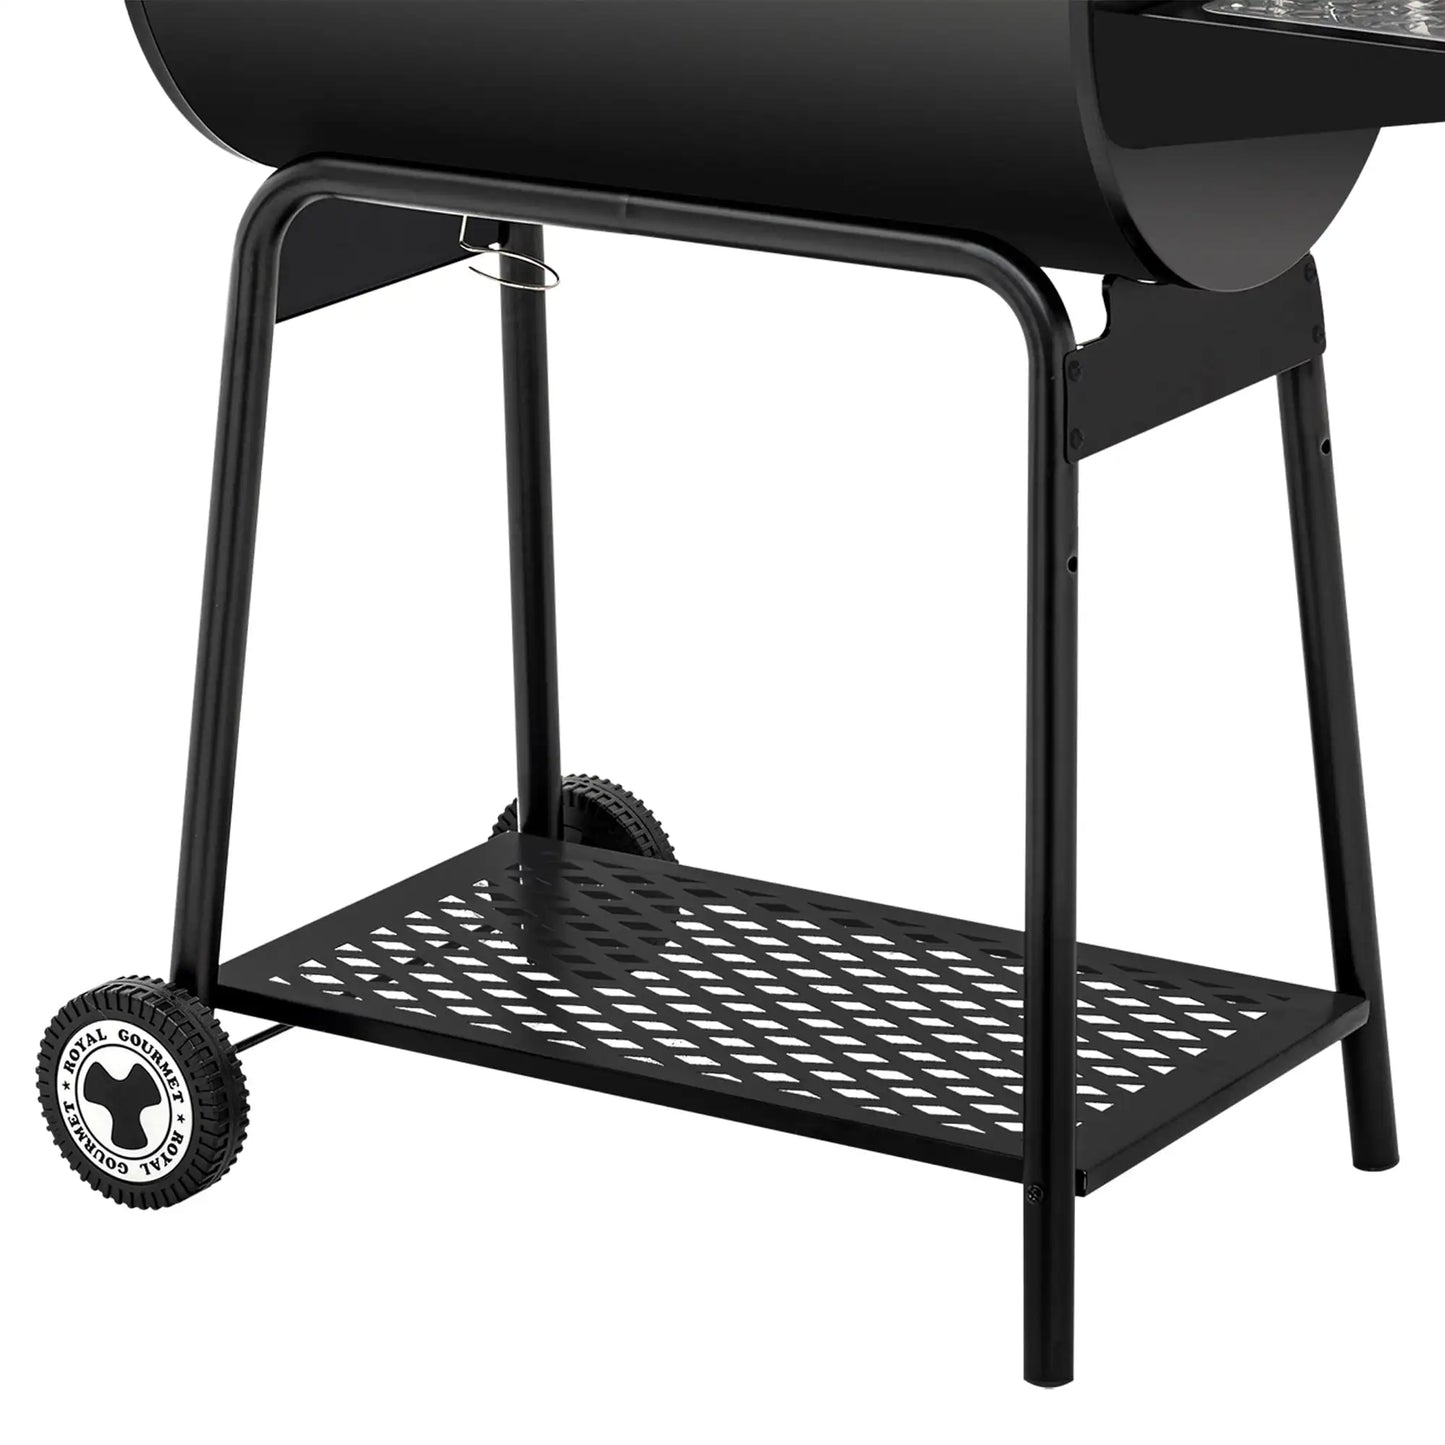 Royal Gourmet 30" CC1830 627Square Inches Barrel Charcoal Grill with Side Table